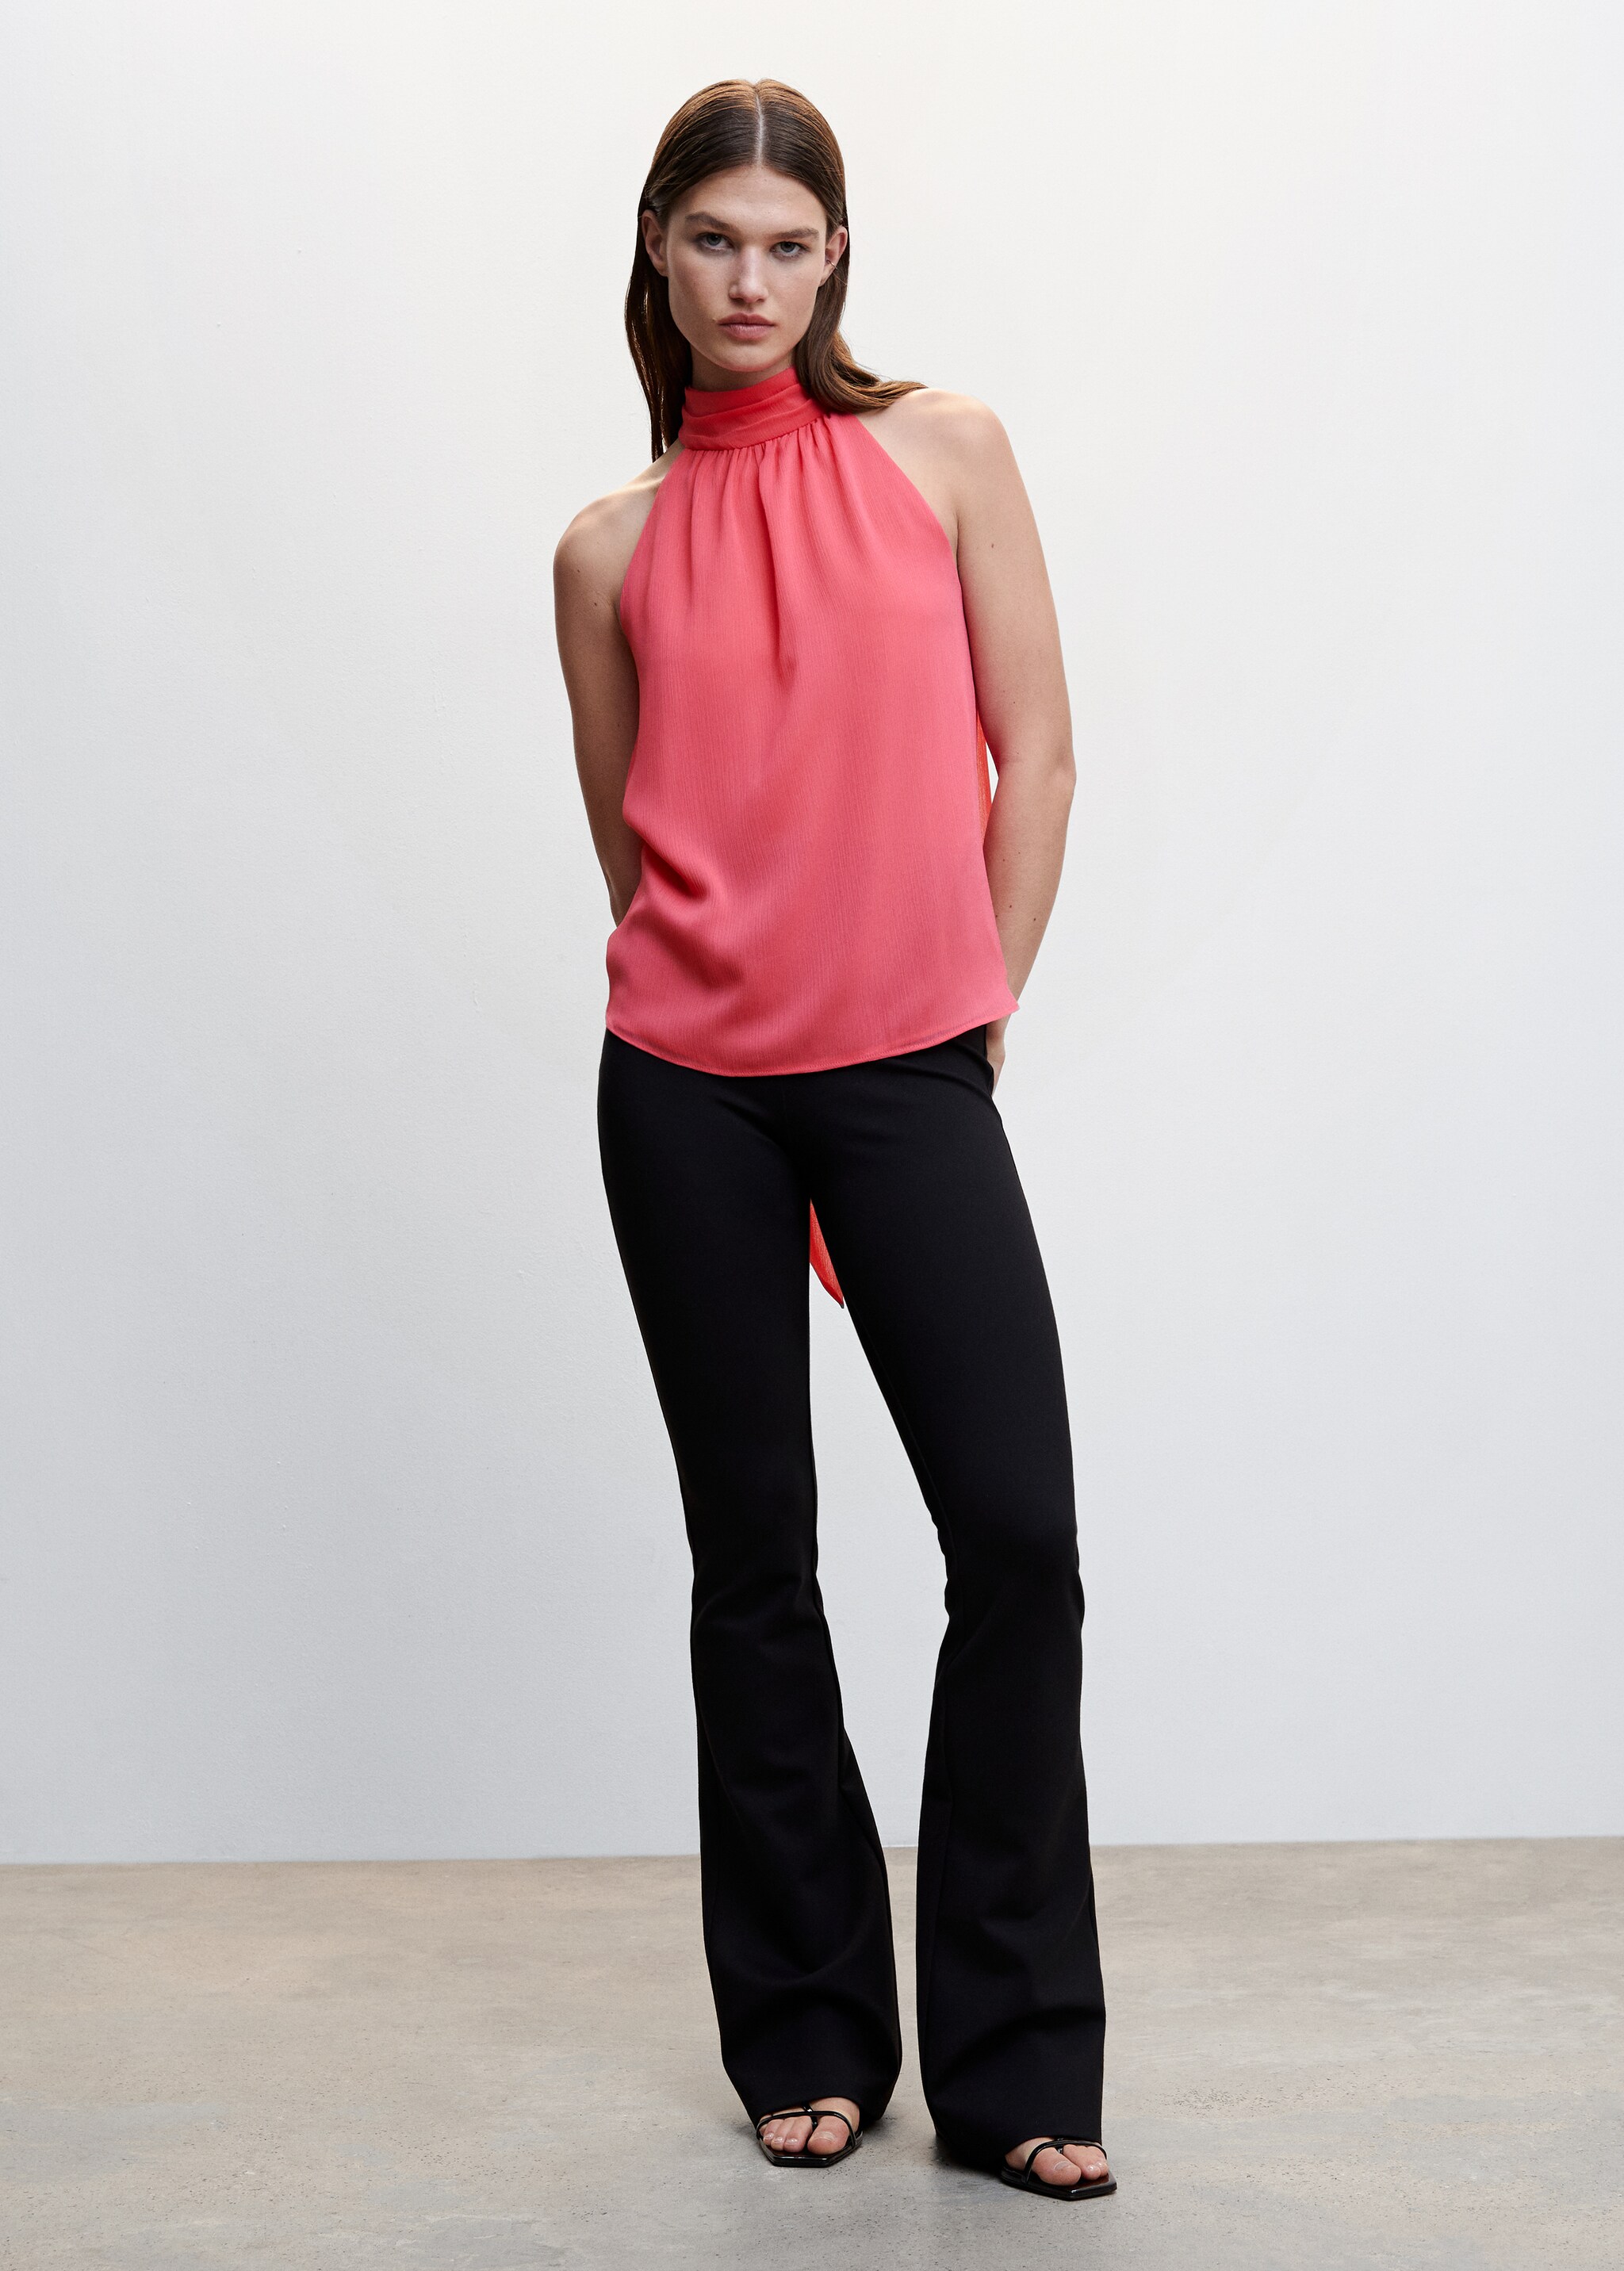 Halter neck blouse with bow - General plane